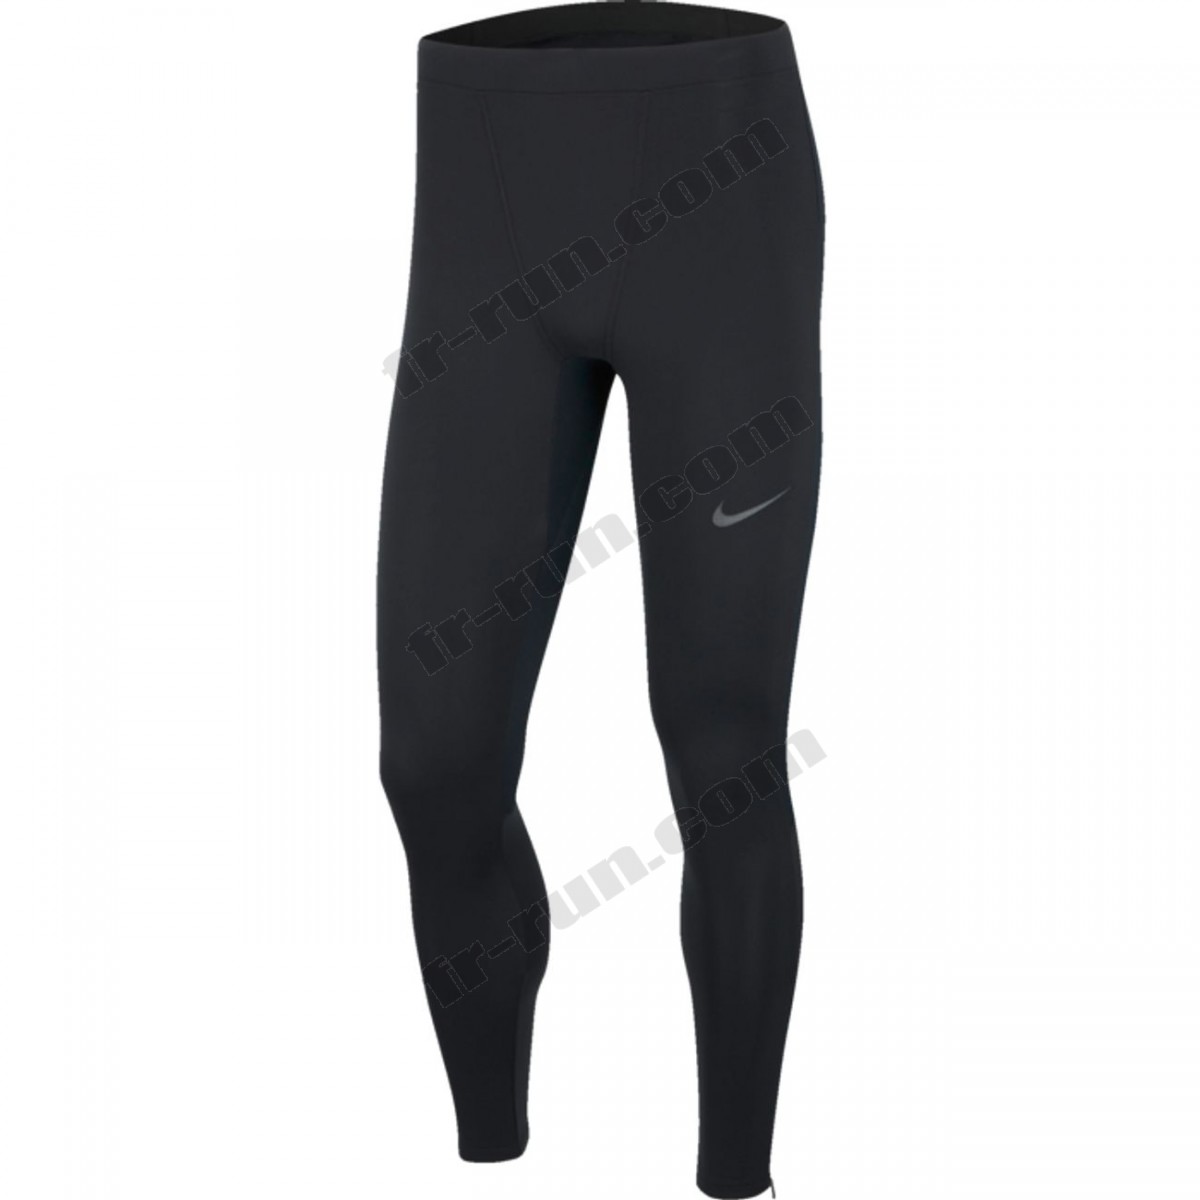 Nike/COLLANT running homme NIKE MBLTY THRML RPL ◇◇◇ Pas Cher Du Tout - Nike/COLLANT running homme NIKE MBLTY THRML RPL ◇◇◇ Pas Cher Du Tout